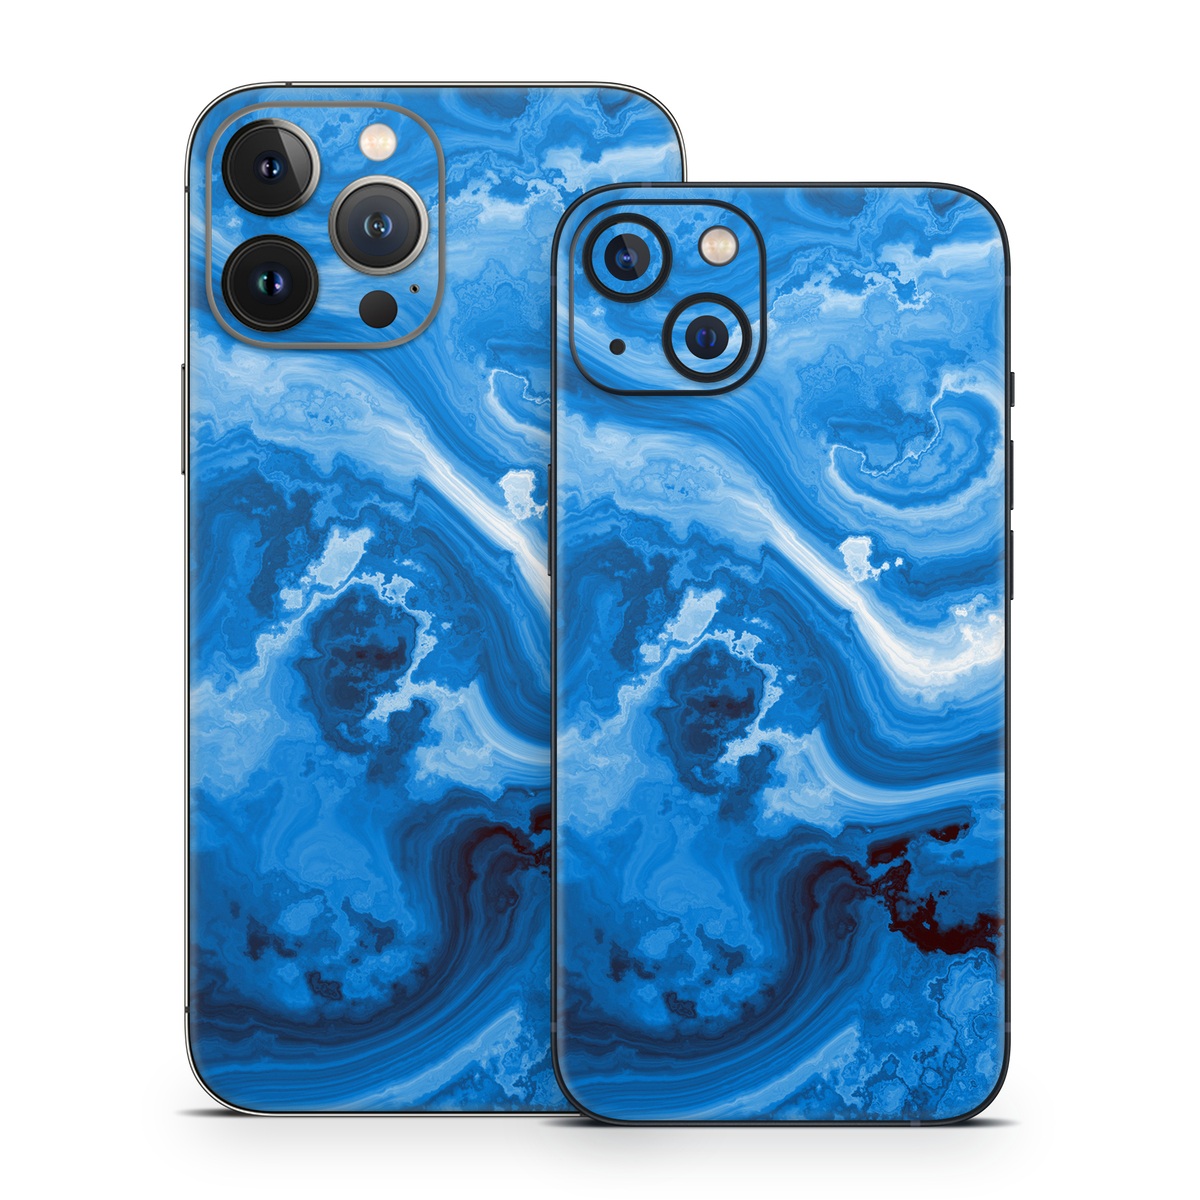 iPhone 13 Series Skin design of Blue, Water, Aqua, Azure, Turquoise, Pattern, Liquid, Wave, Electric blue, Design, with blue, white, black colors